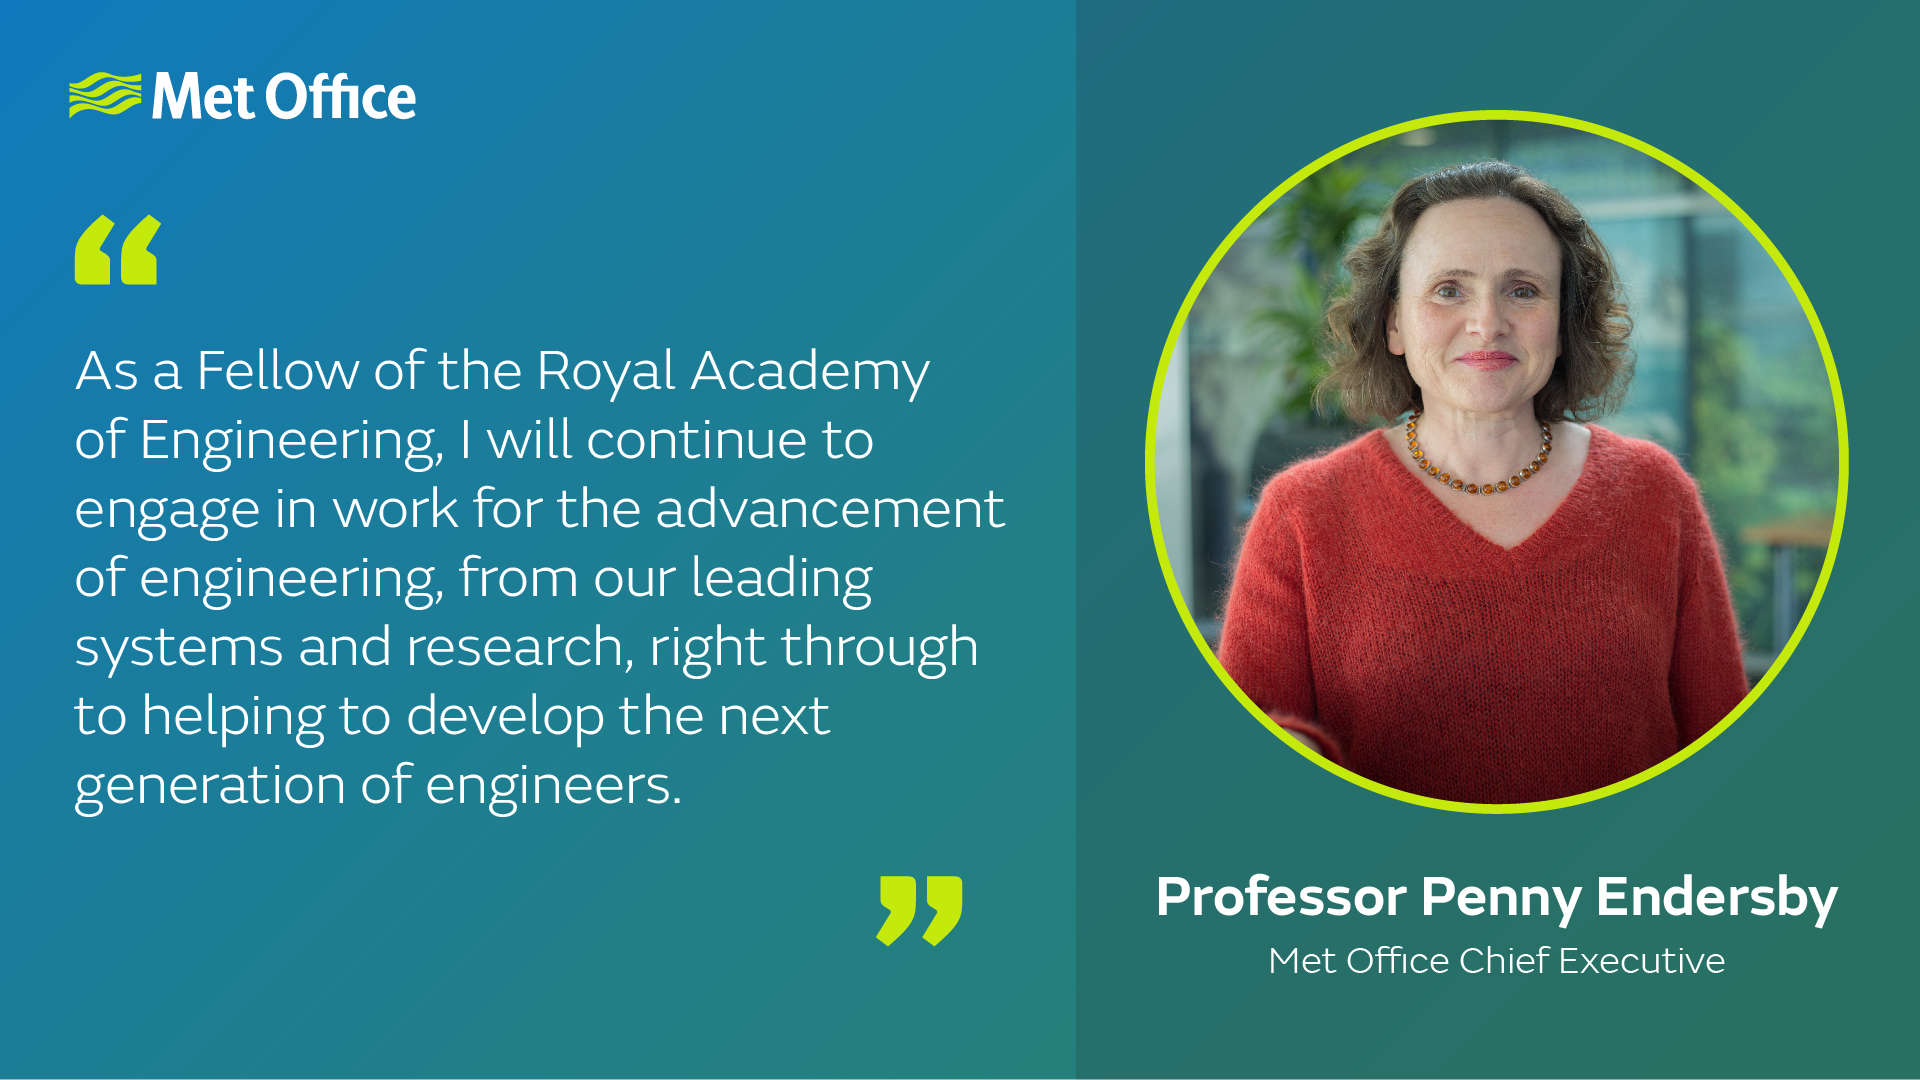 "As a Fellow of the Royal Academy of Engineering, I will continue to engage in work for the advancement of engineering, from our leading systems and research, right through to helping to develop the next generation of engineers." -Professor Penny Endersby, Met Office Chief Executive